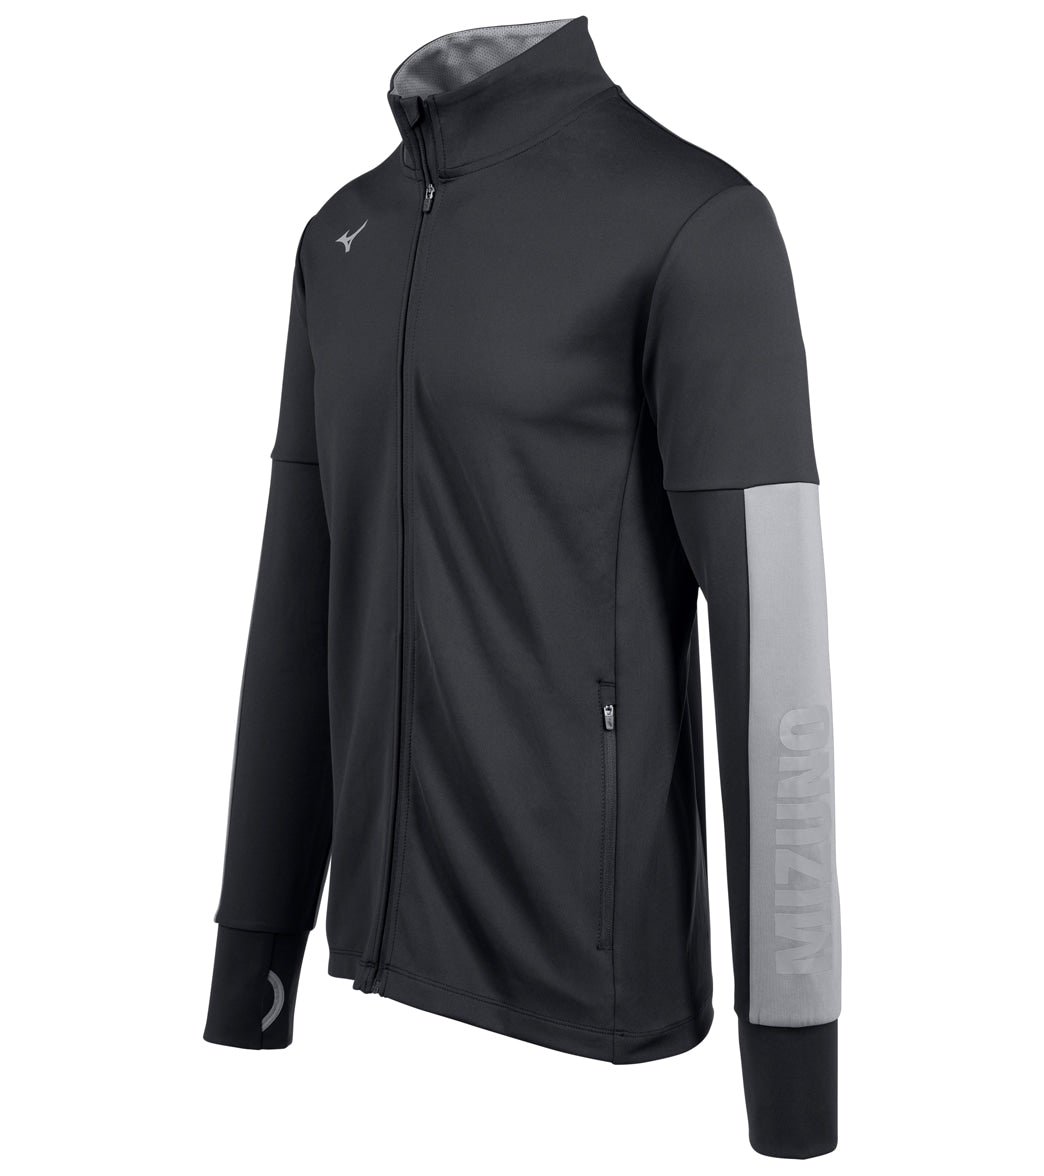 Mizuno Youth Alpha Quest Jacket - Black/Shade Large - Swimoutlet.com